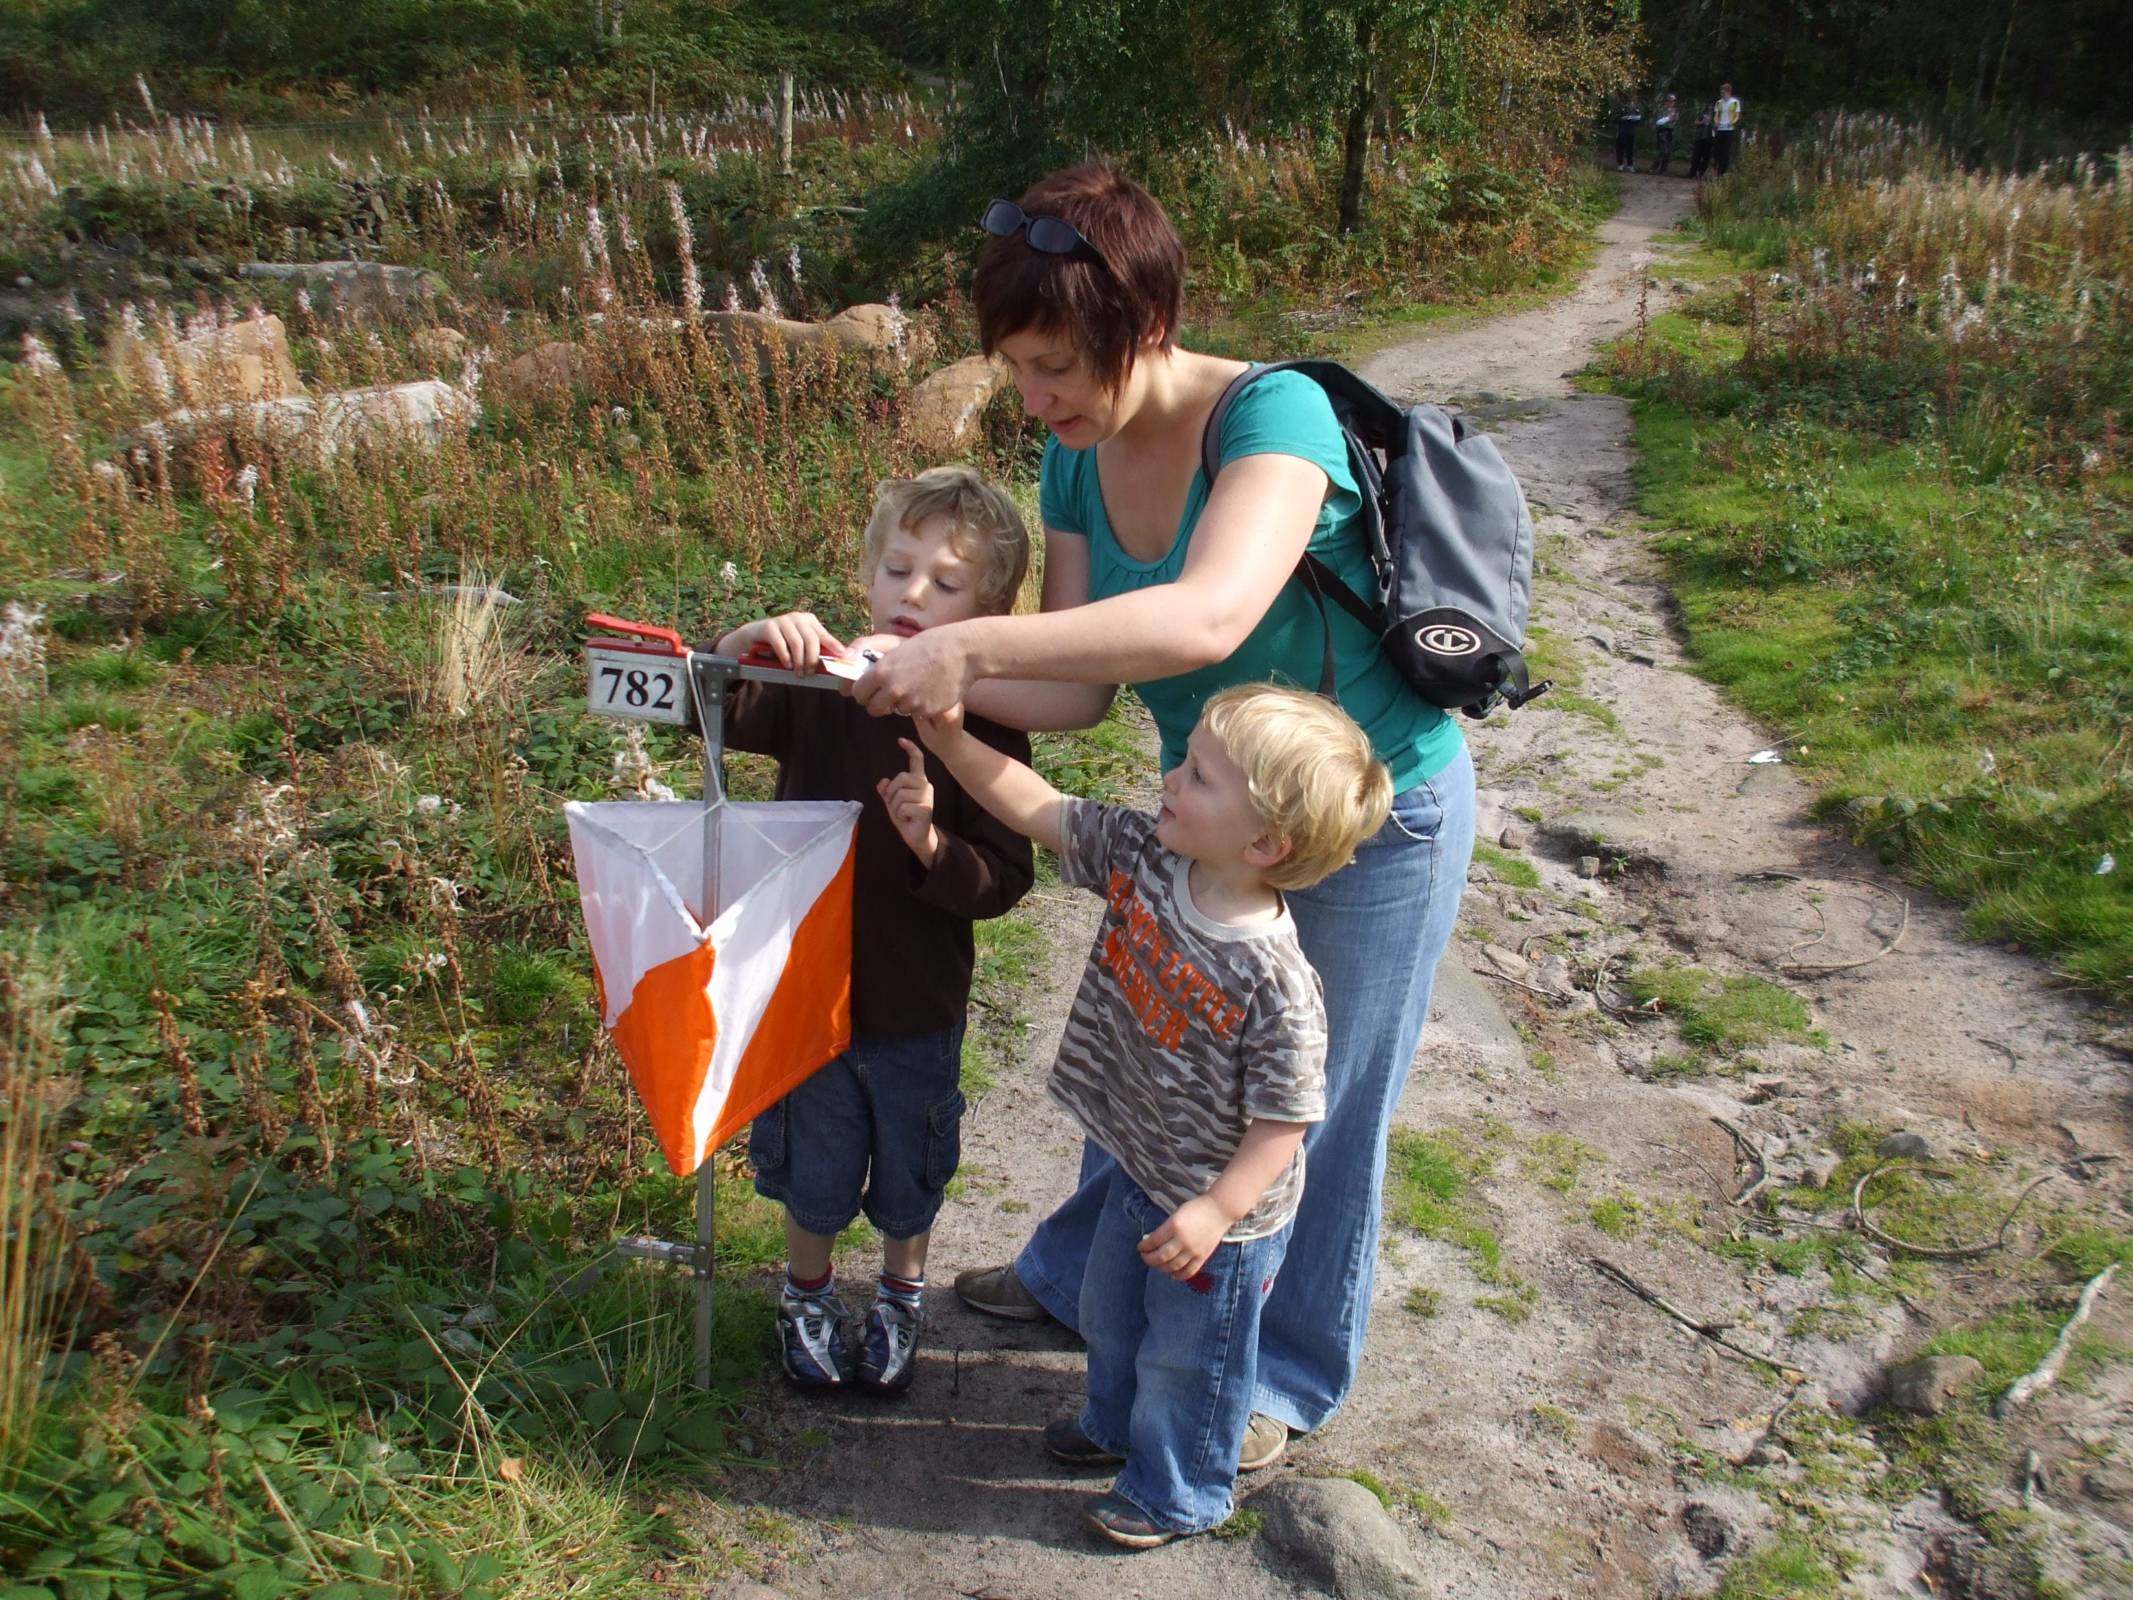 Orienteering with the family